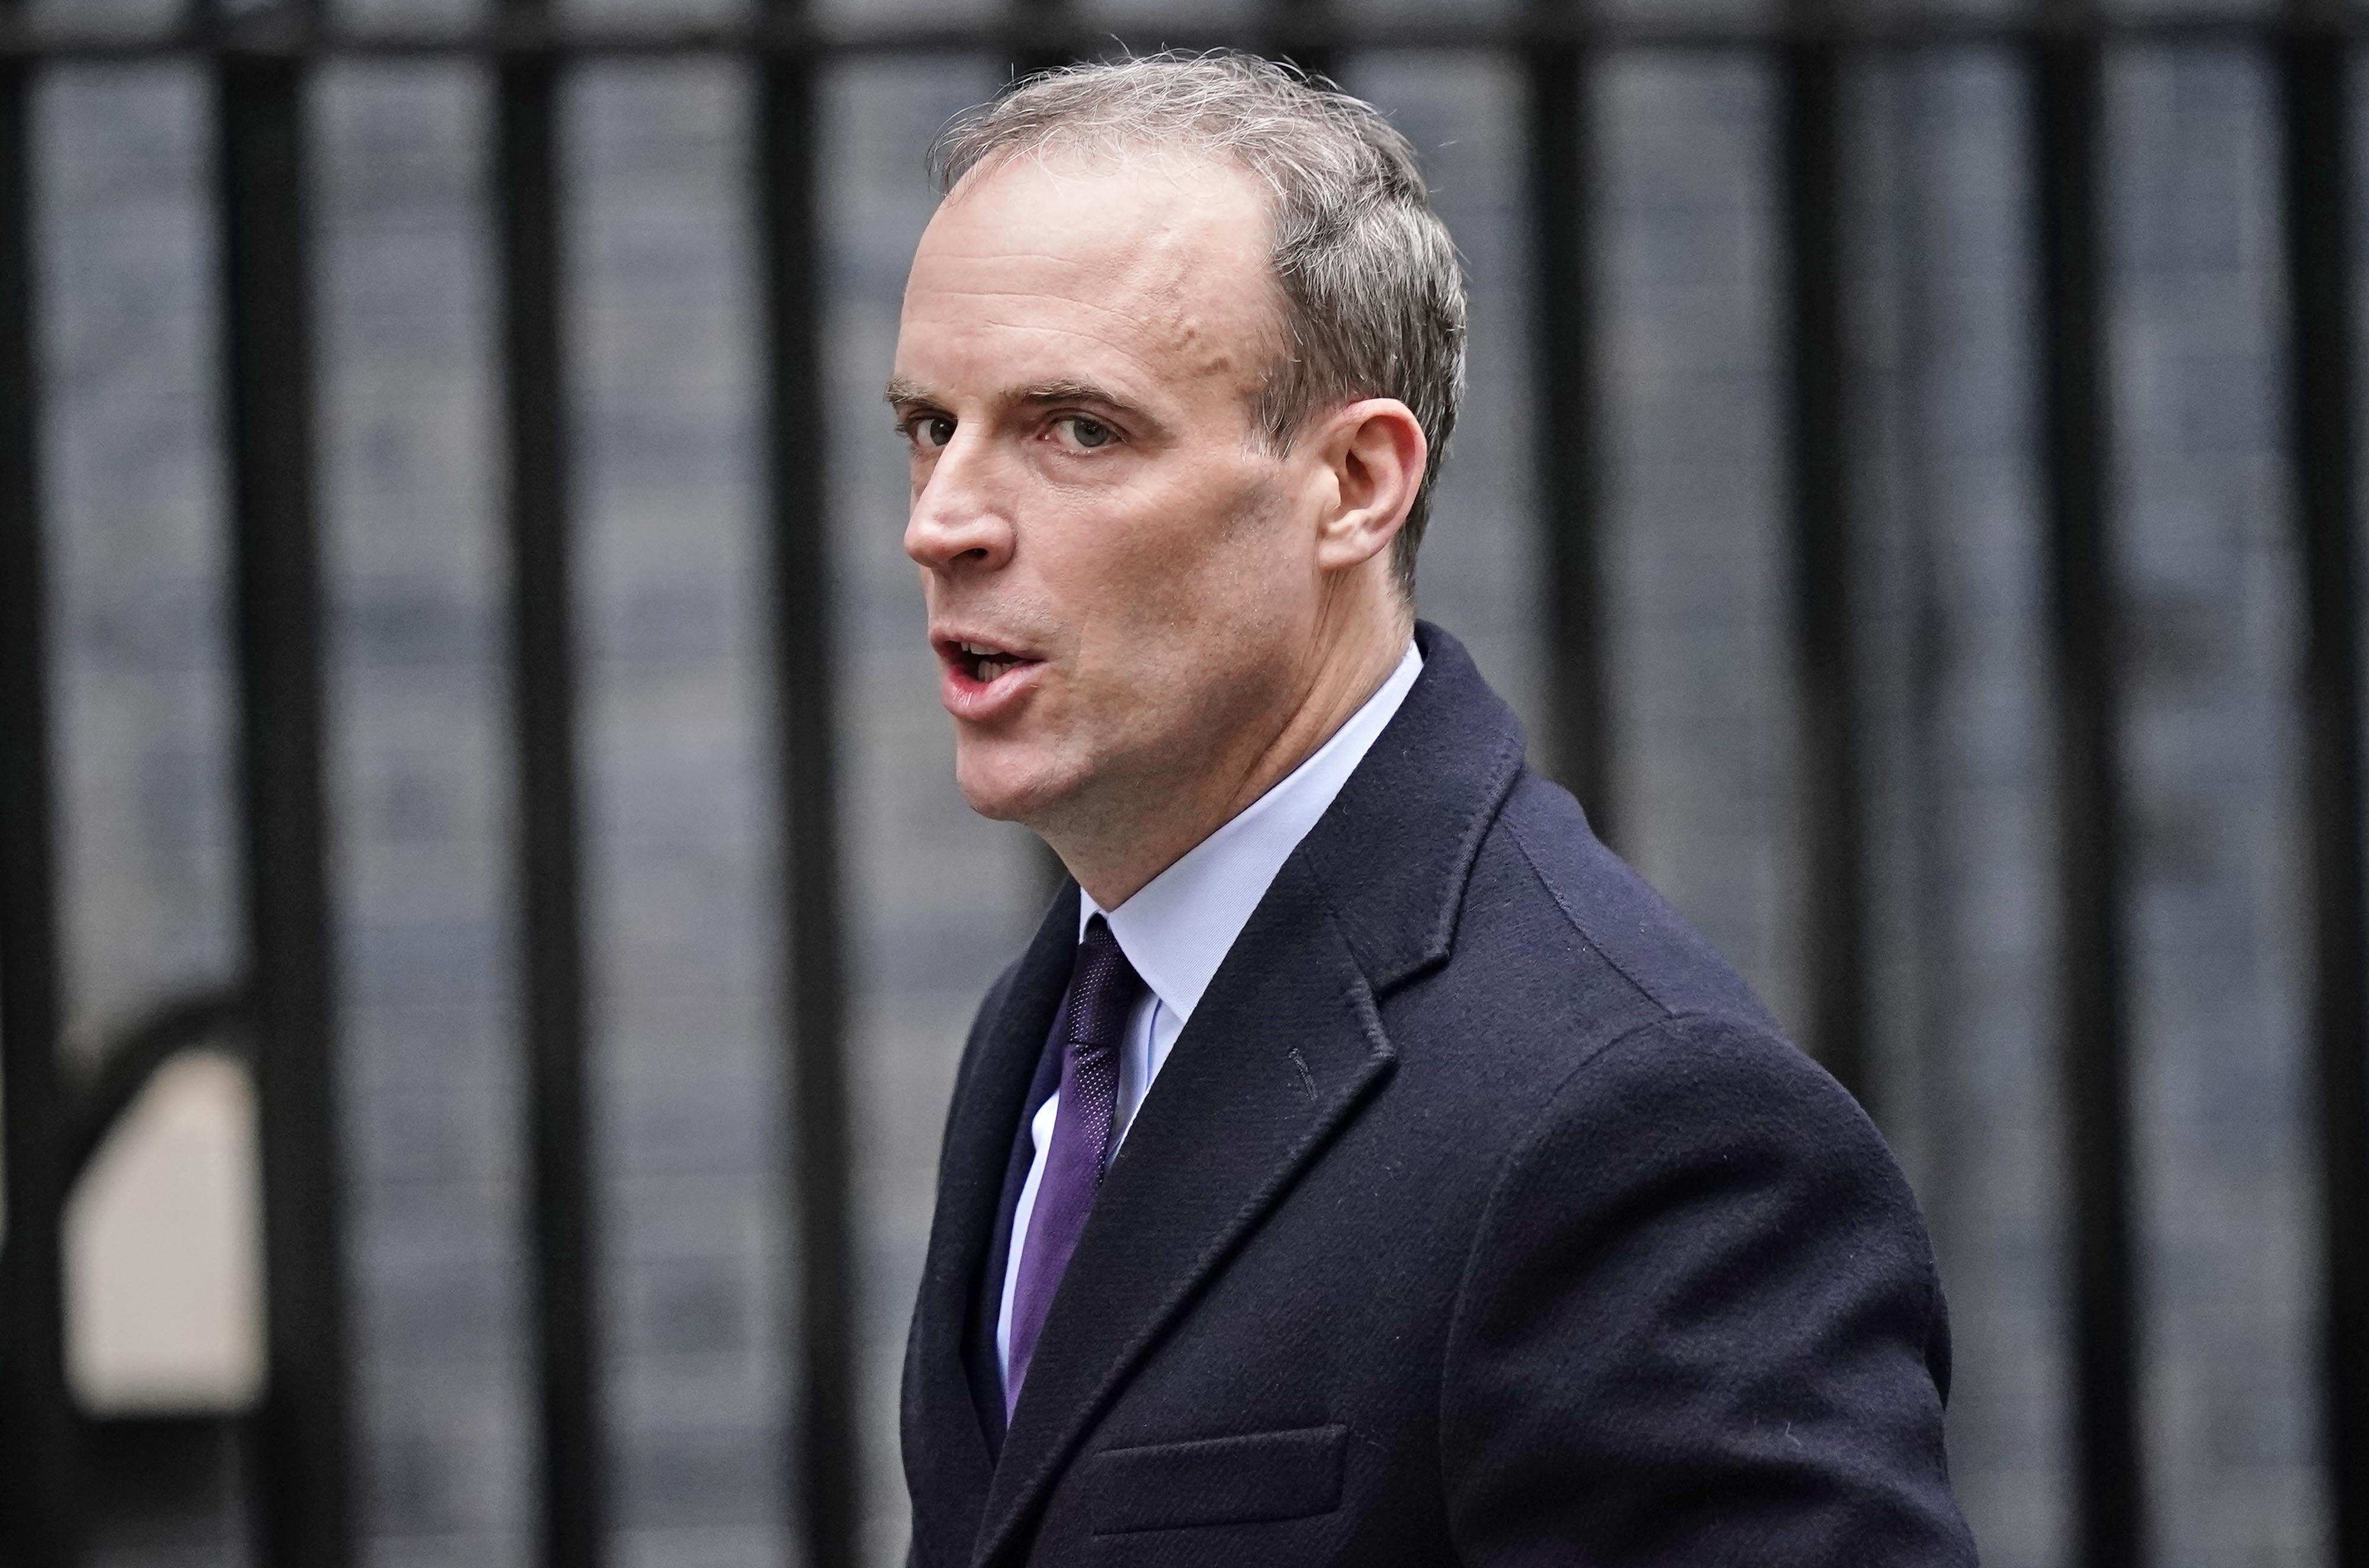 Deputy Prime Minister Dominic Raab said he cannot give ‘any hard, fast guarantees’ that more restrictions will not be needed before Christmas Day (Aaron Chown/PA)